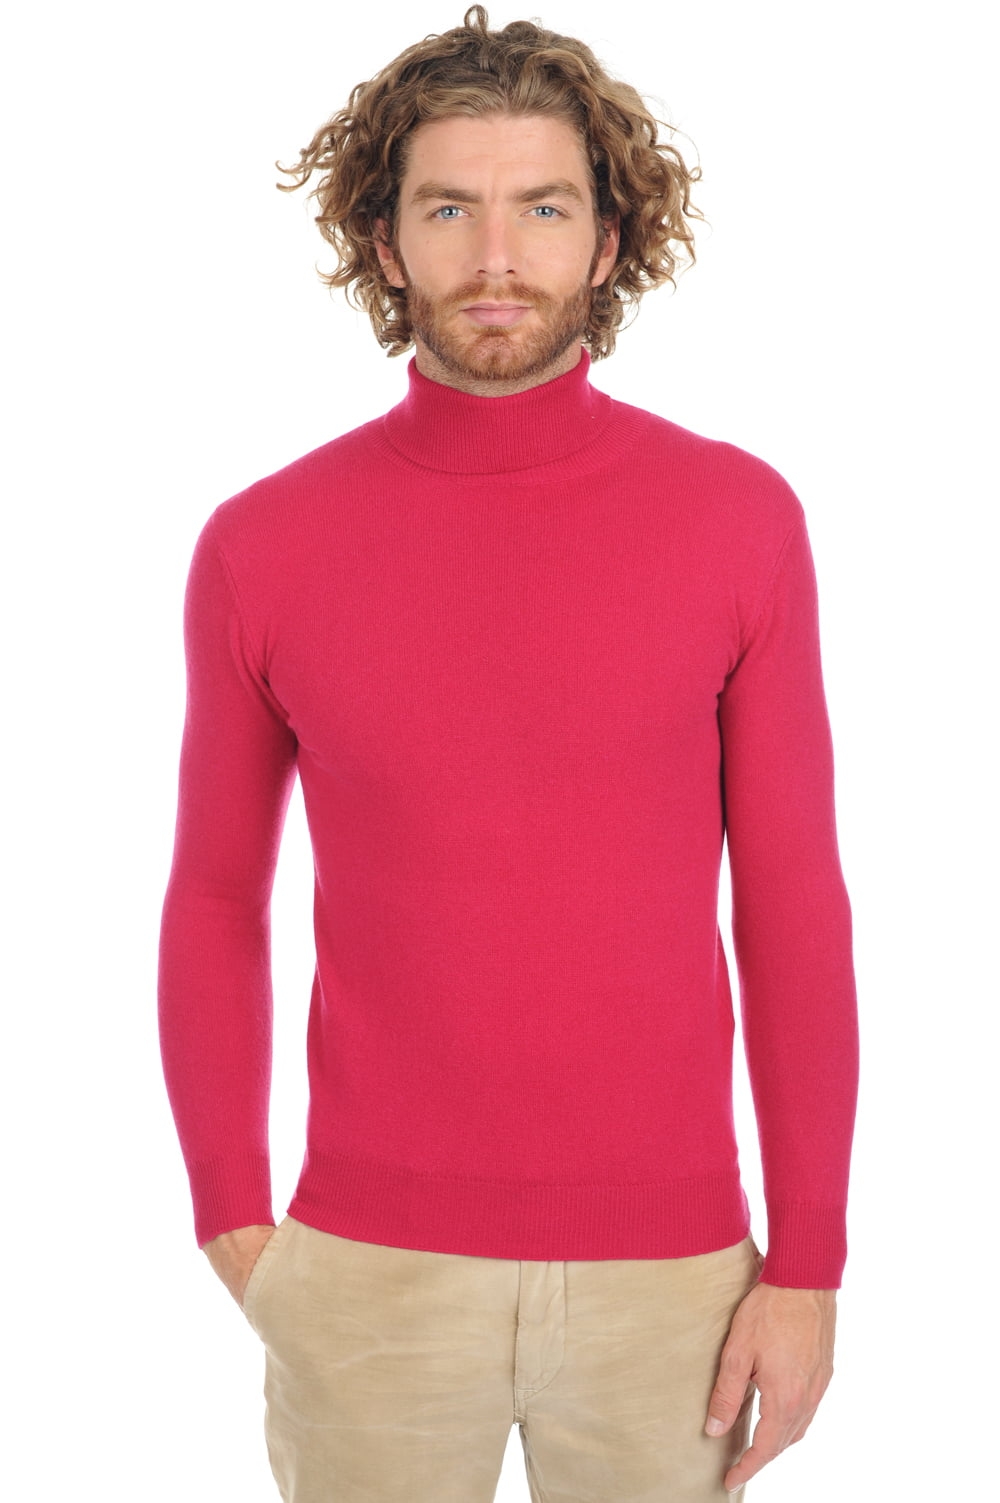 Cashmere men low prices tarry first red fuschsia xl